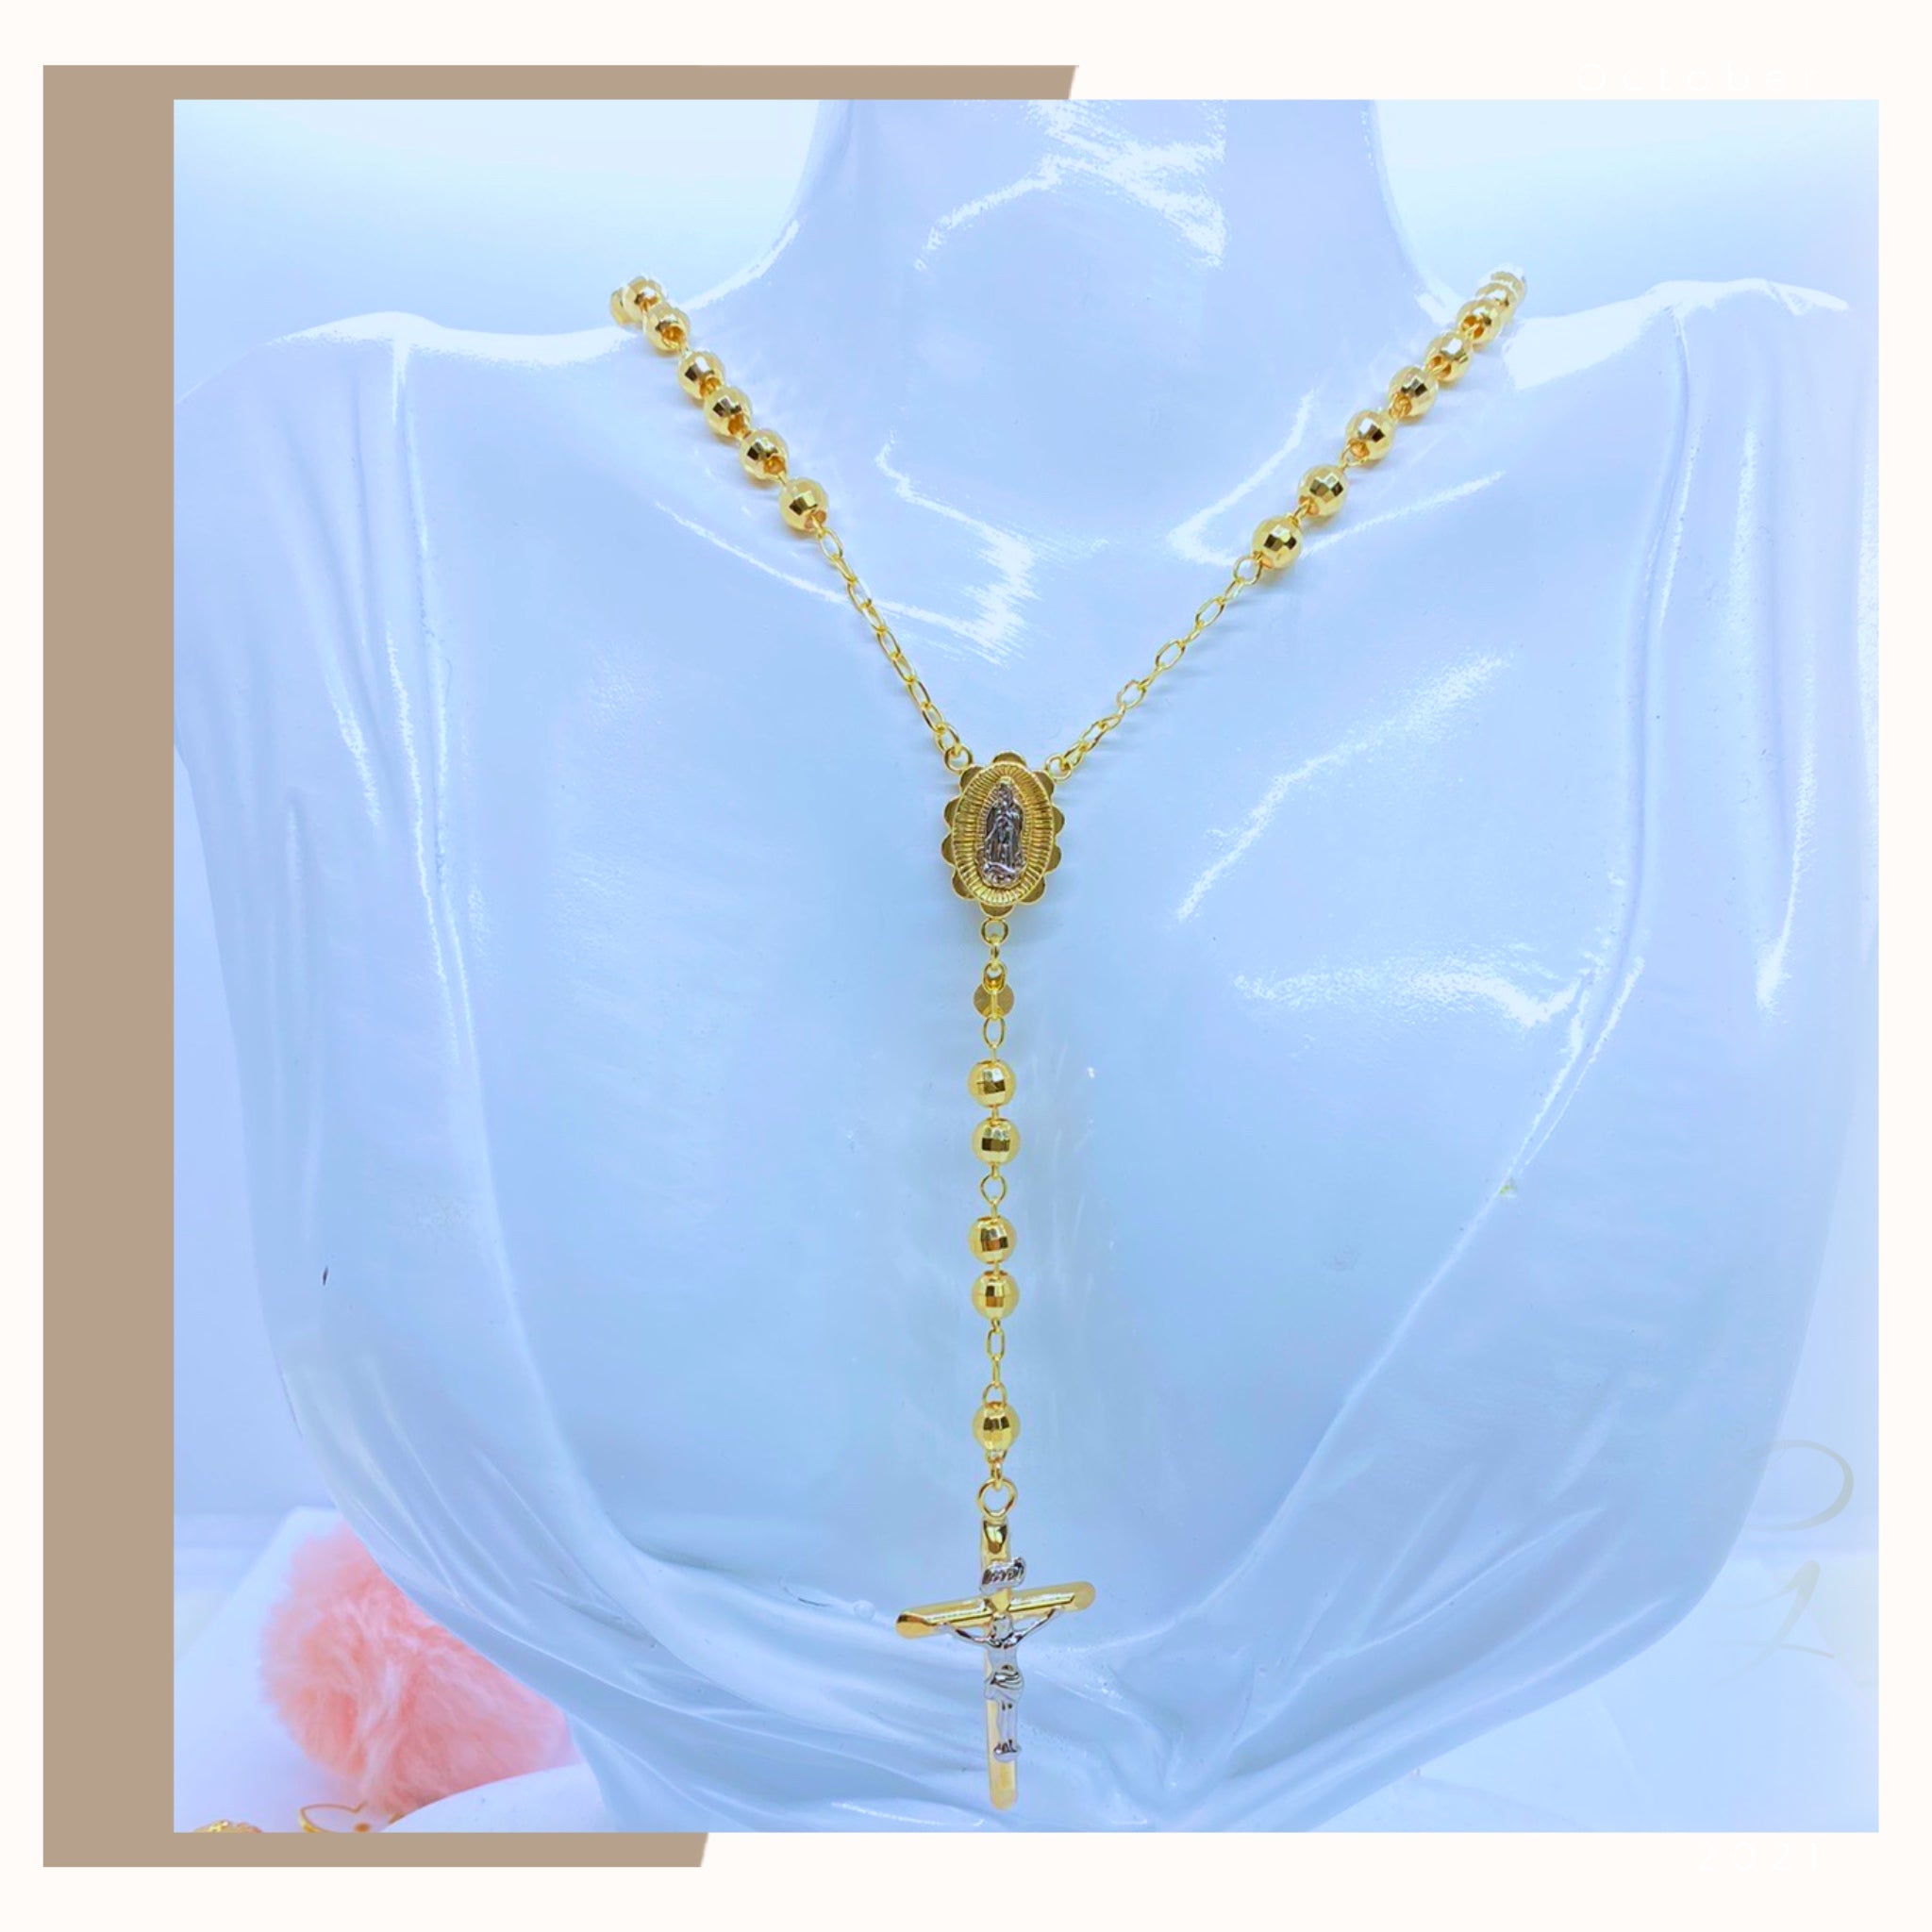 Rosary Necklace in 10K Tri-Tone Gold - 17